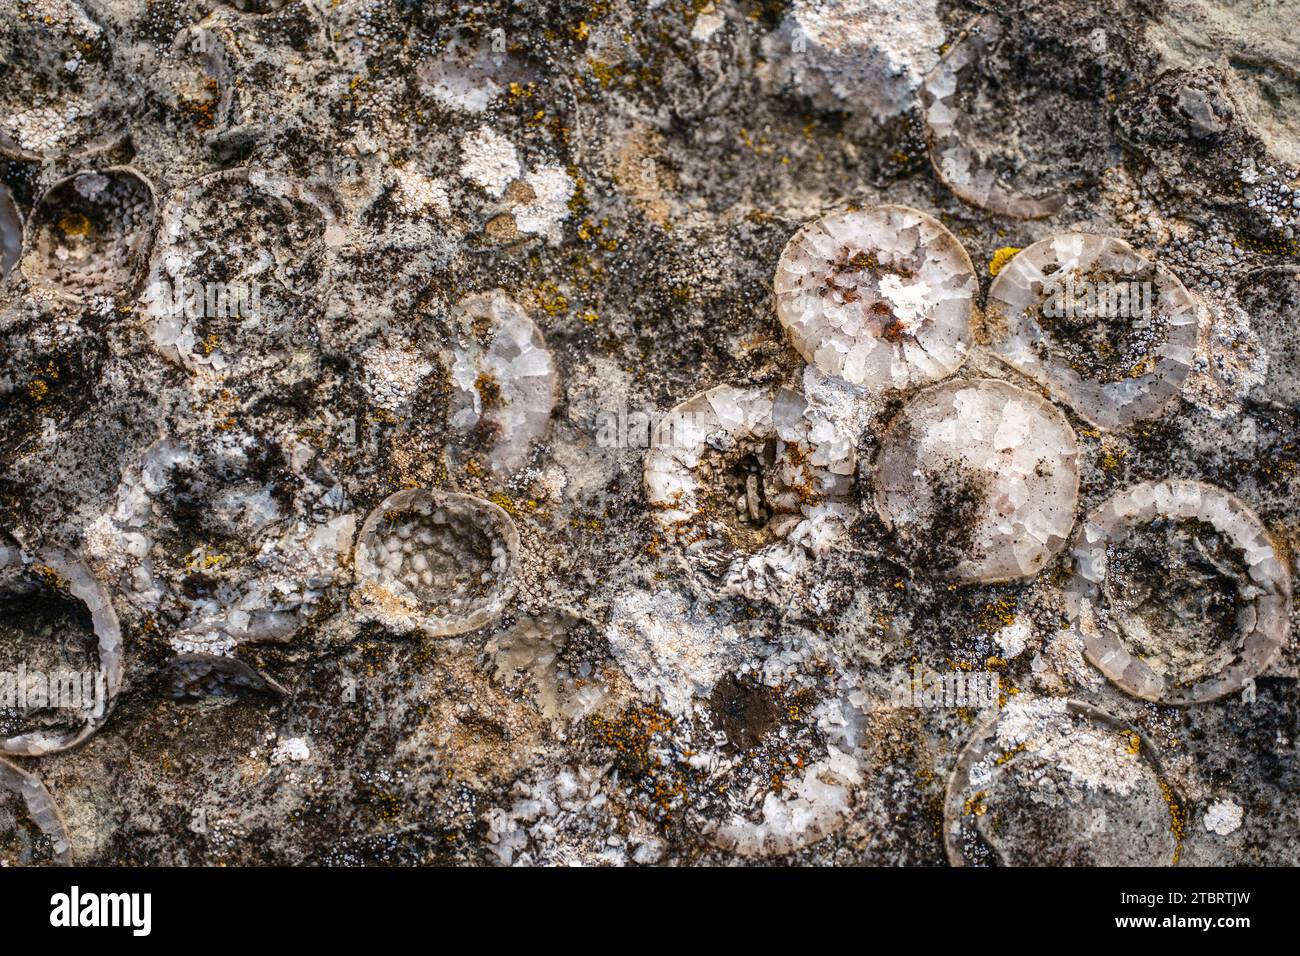 Fossilized shells with silica, Öland, Sweden Stock Photo